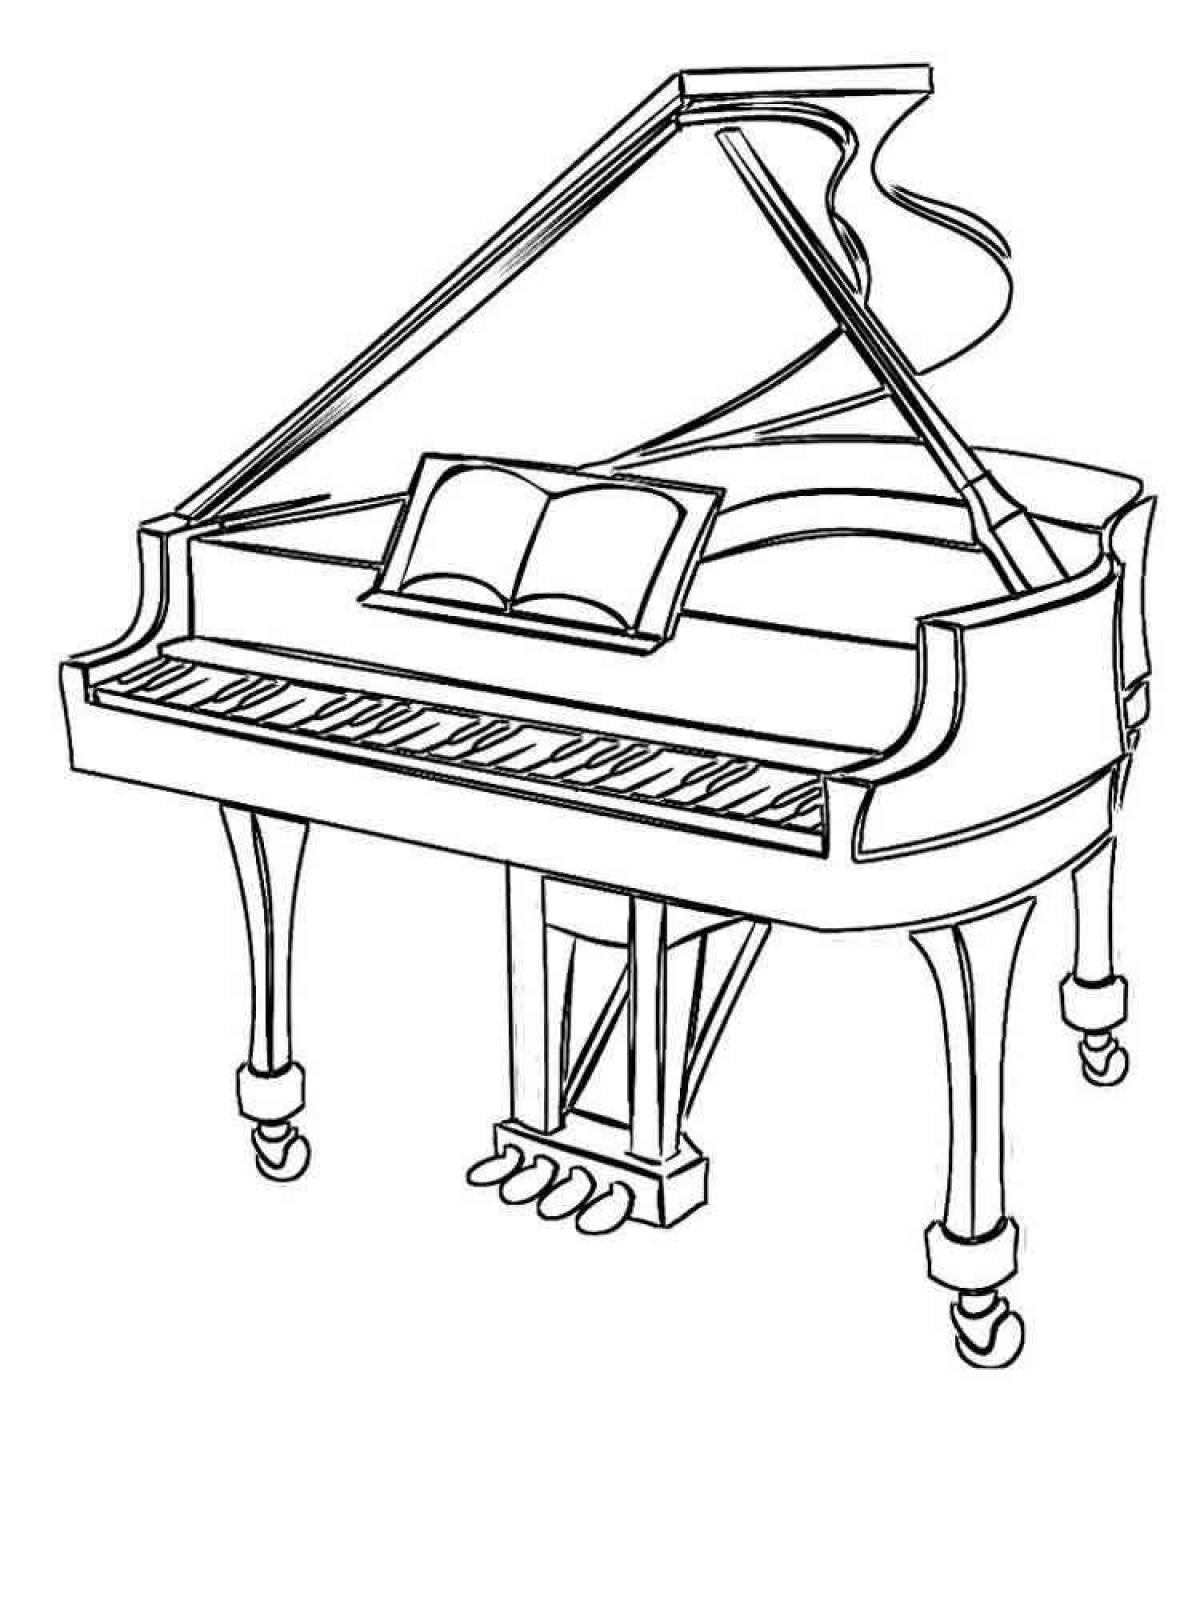 Playful piano coloring page